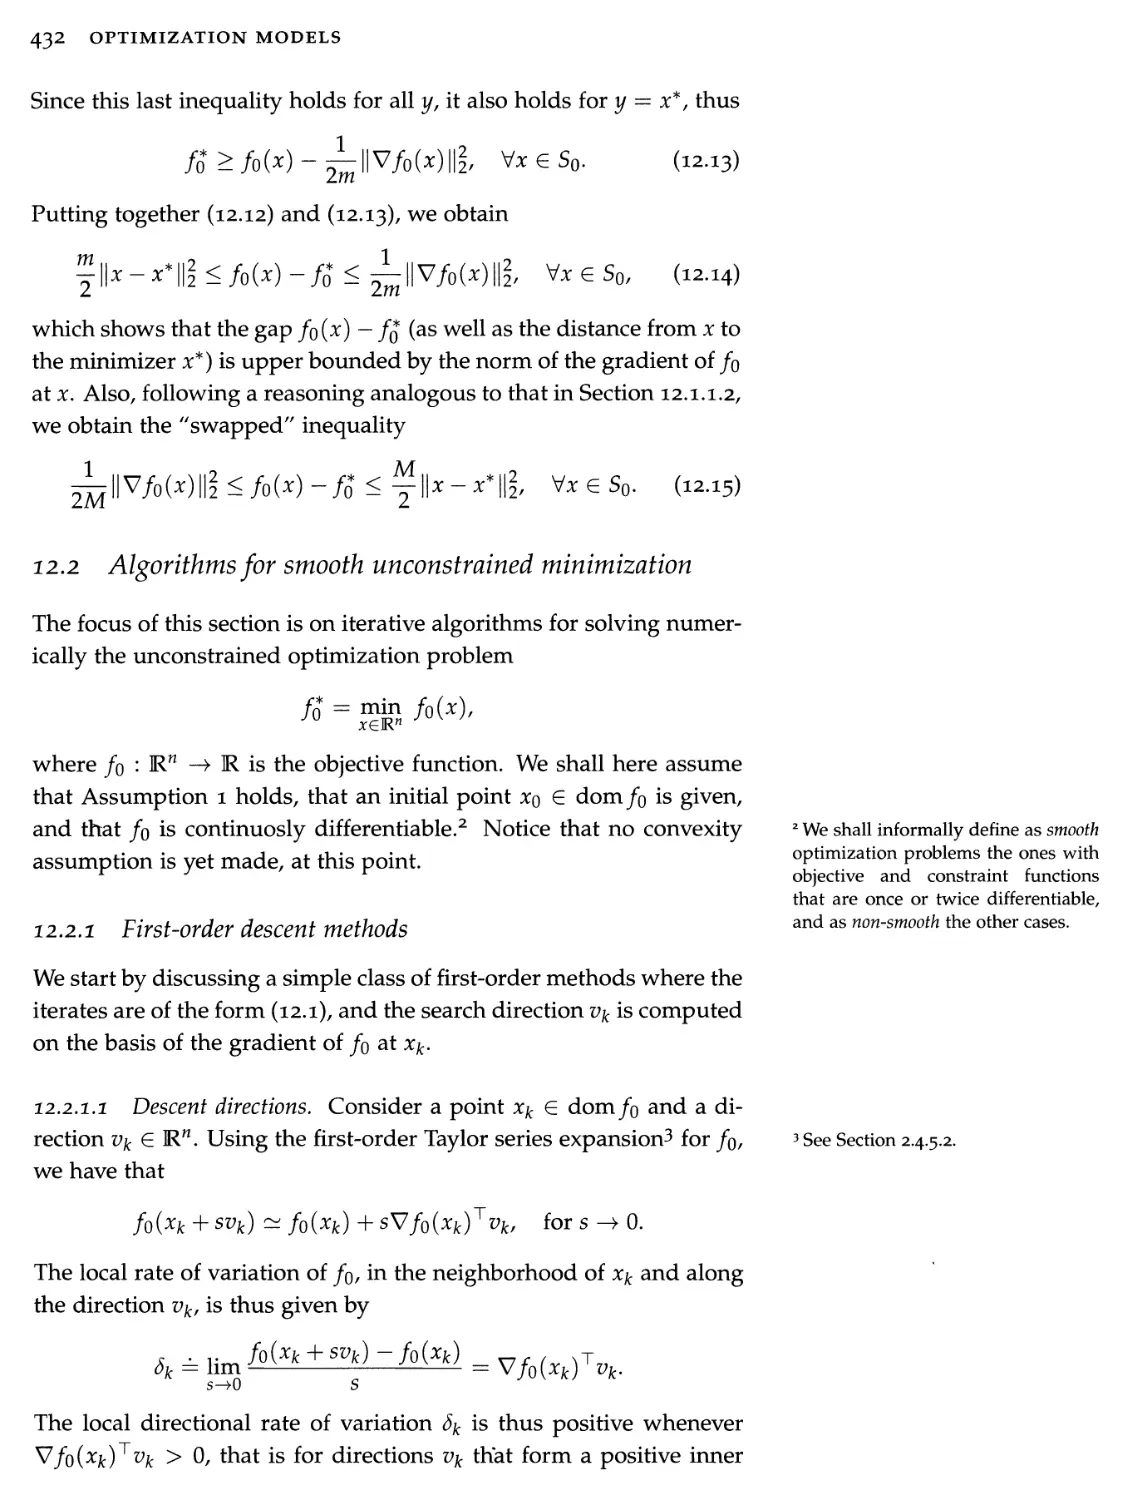 12.2 Algorithms for smooth unconstrained minimization 432